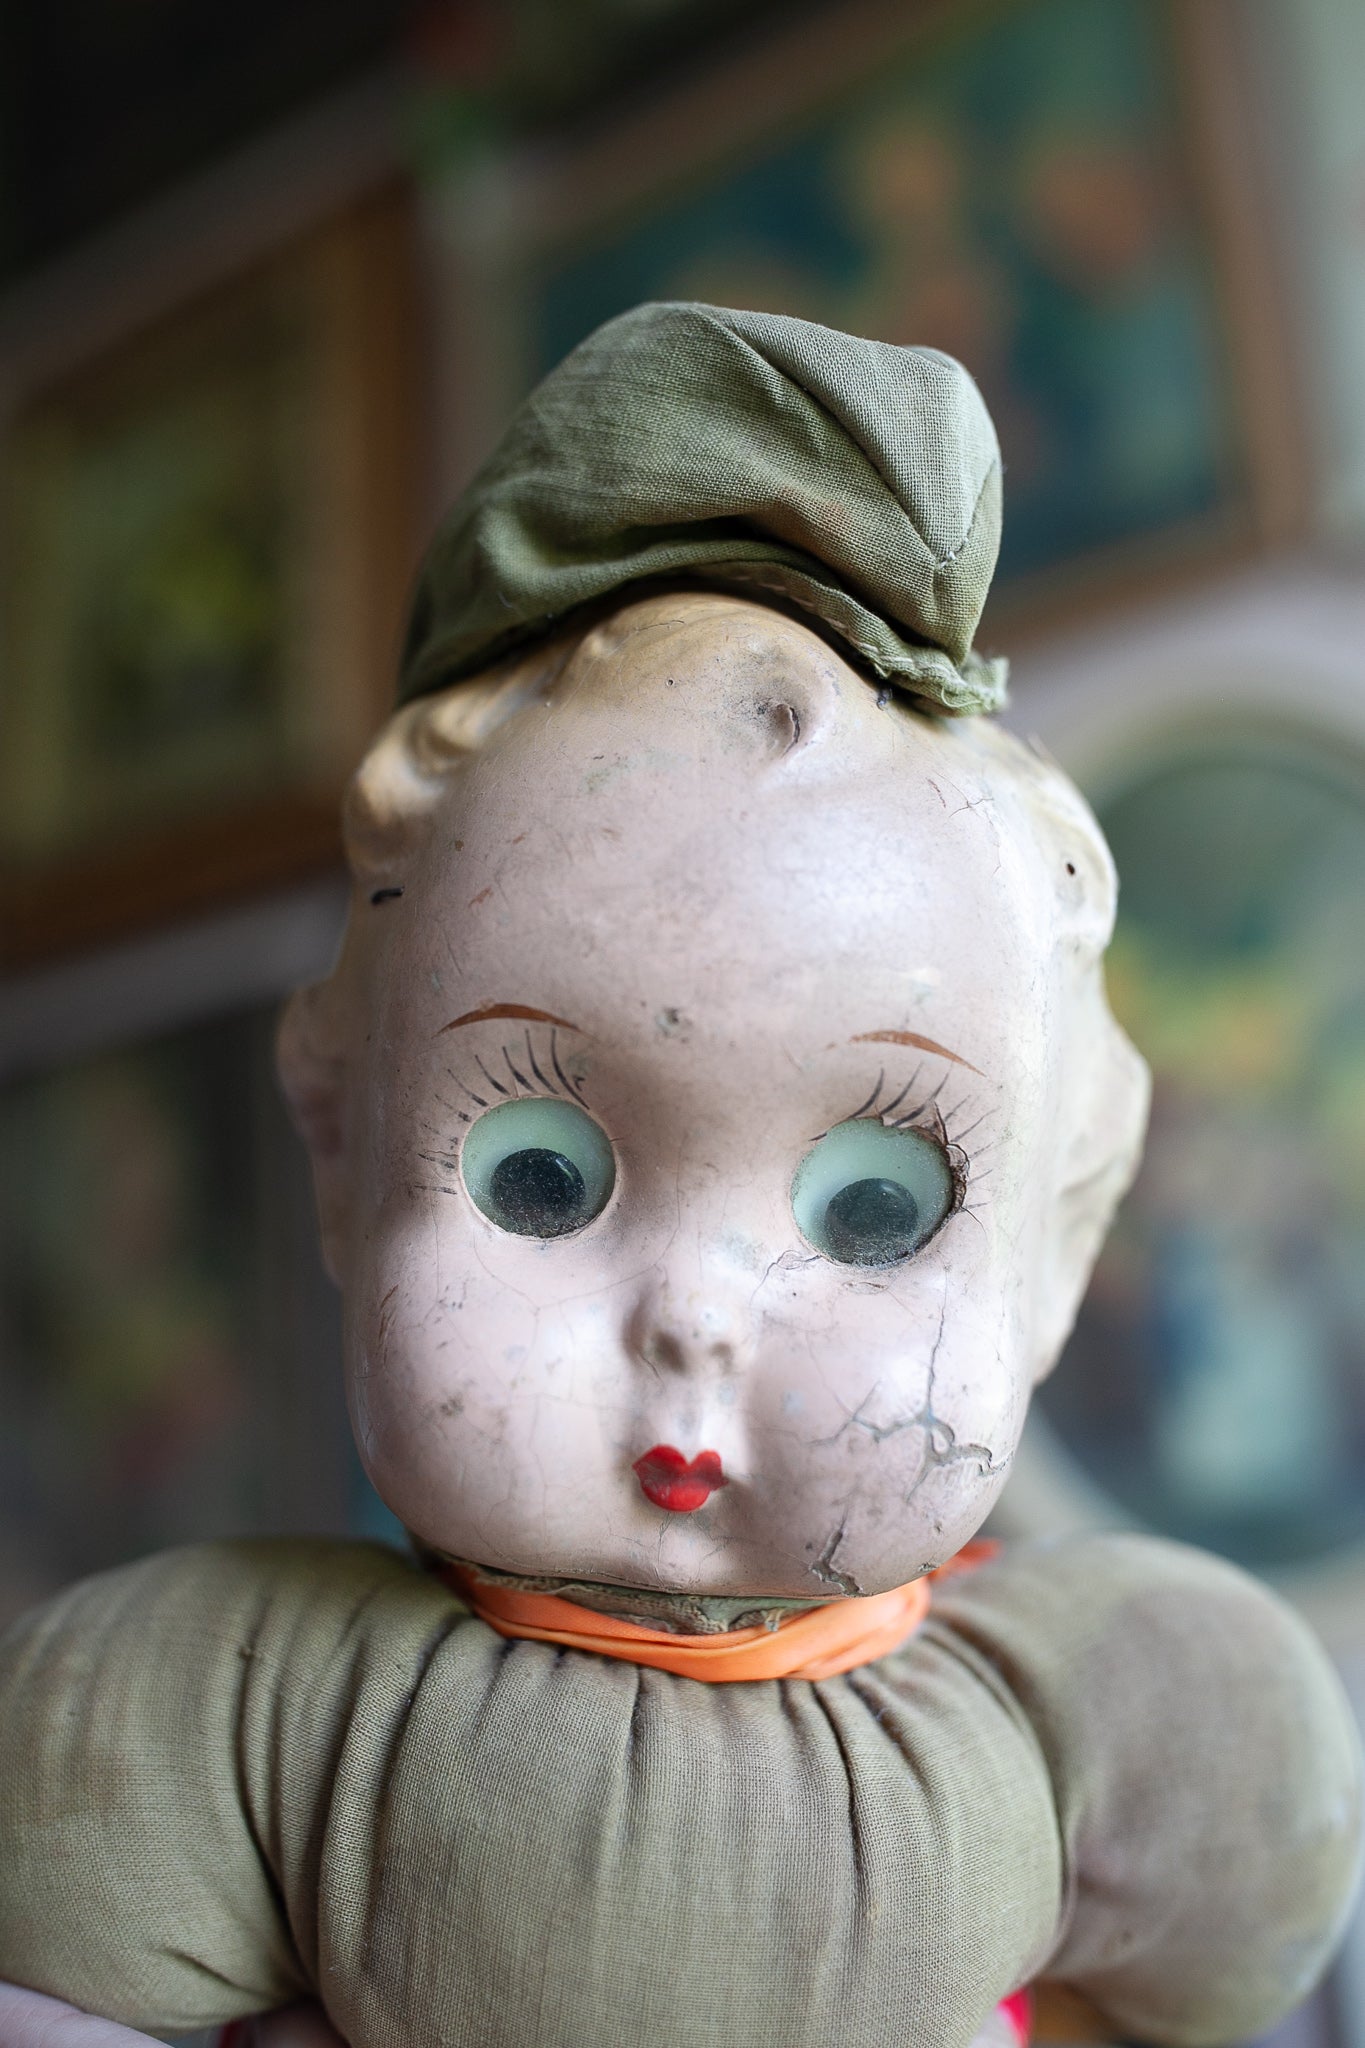 Vintage Googly Eyed Doll - Sailor Doll -Googly Eyed Sailor Boy Doll by Ralph A. Freundlich, Vintage 1937 Plush Toy with Google Eyes